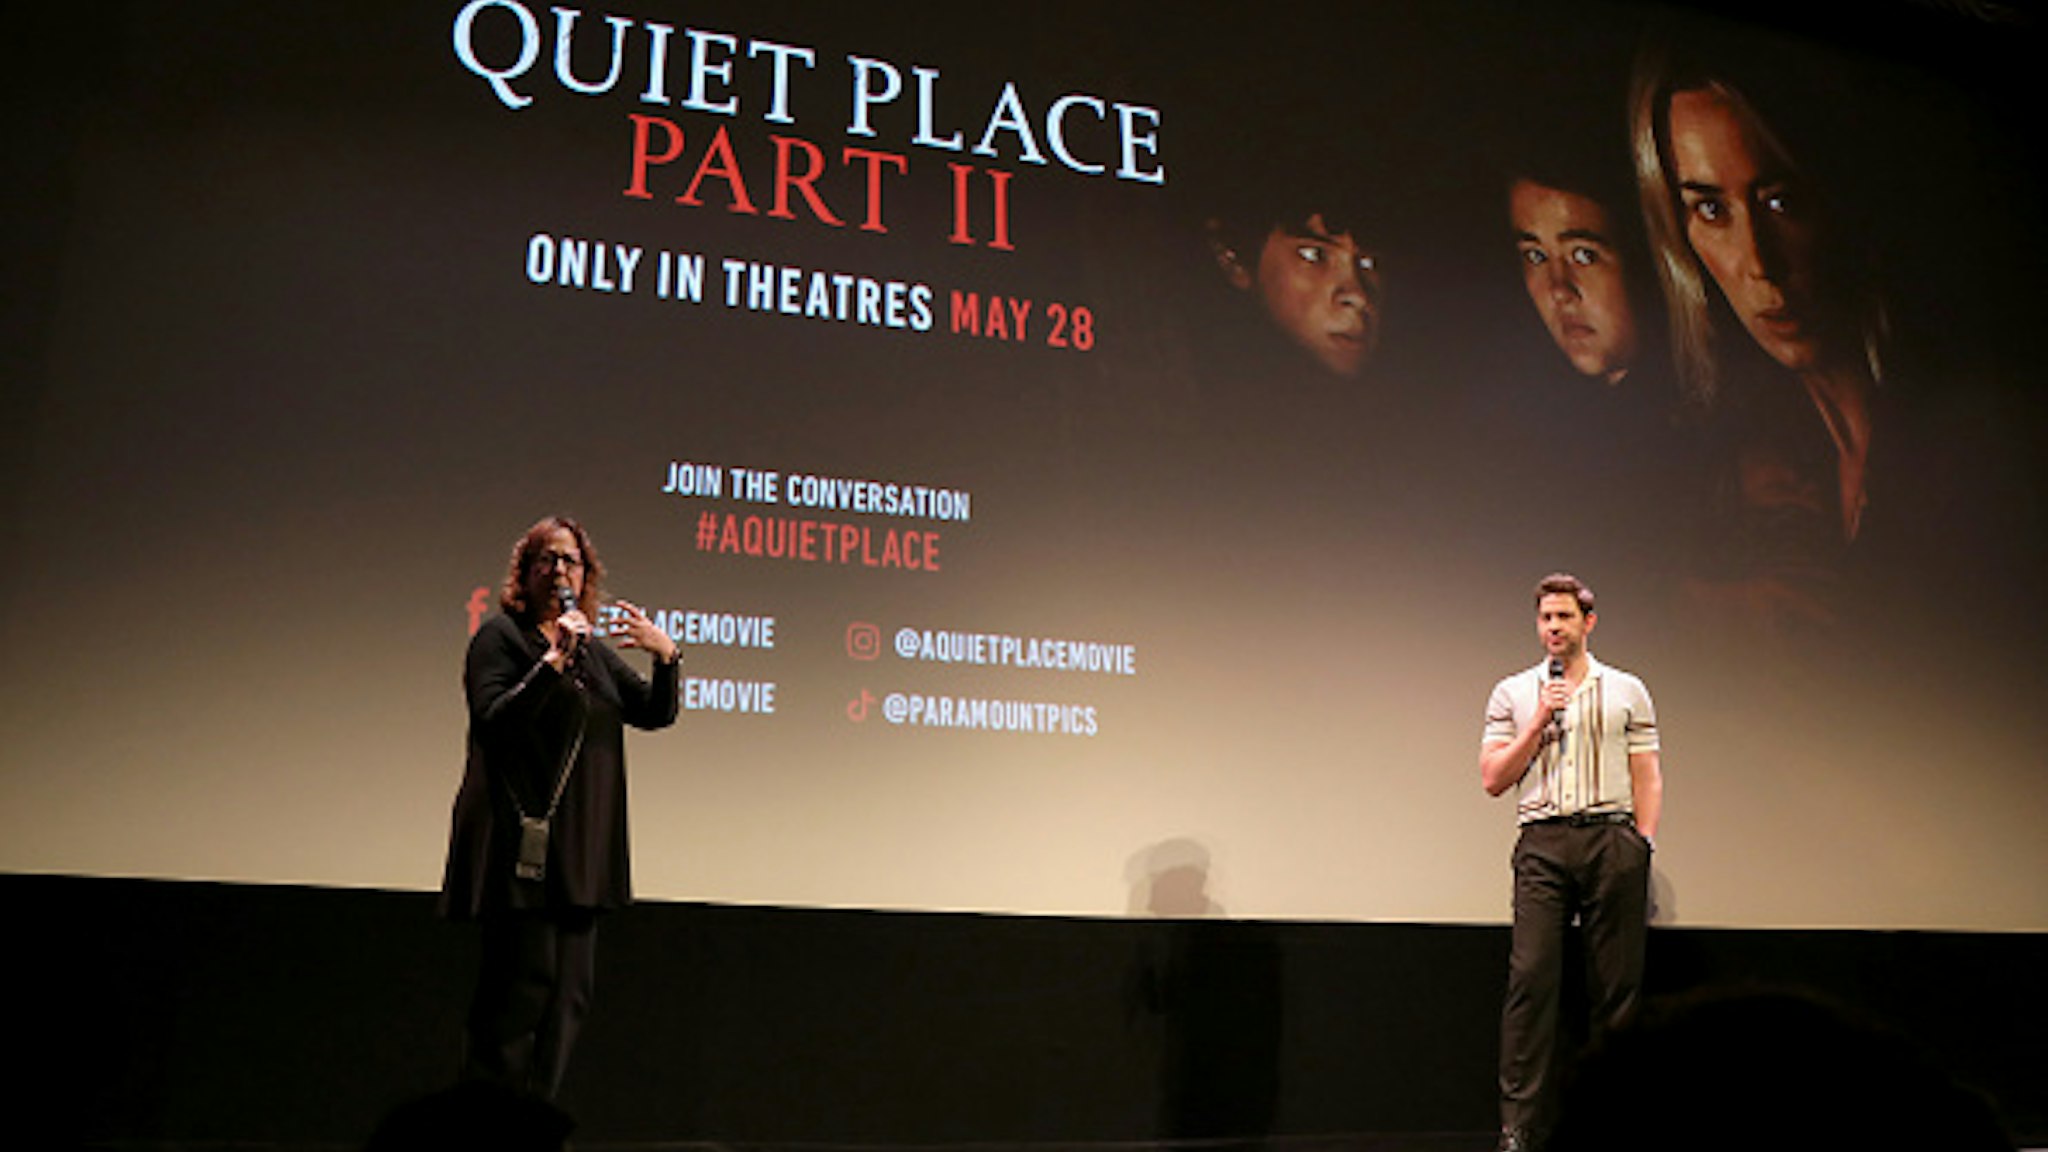 AUSTIN, TEXAS - MAY 28: Janet Pierson (L) and John Krasinski (R) speak onstage at the Austin screening of 'A Quiet Place Part II' at the The Paramount Theater on May 28, 2021 in Austin, Texas.